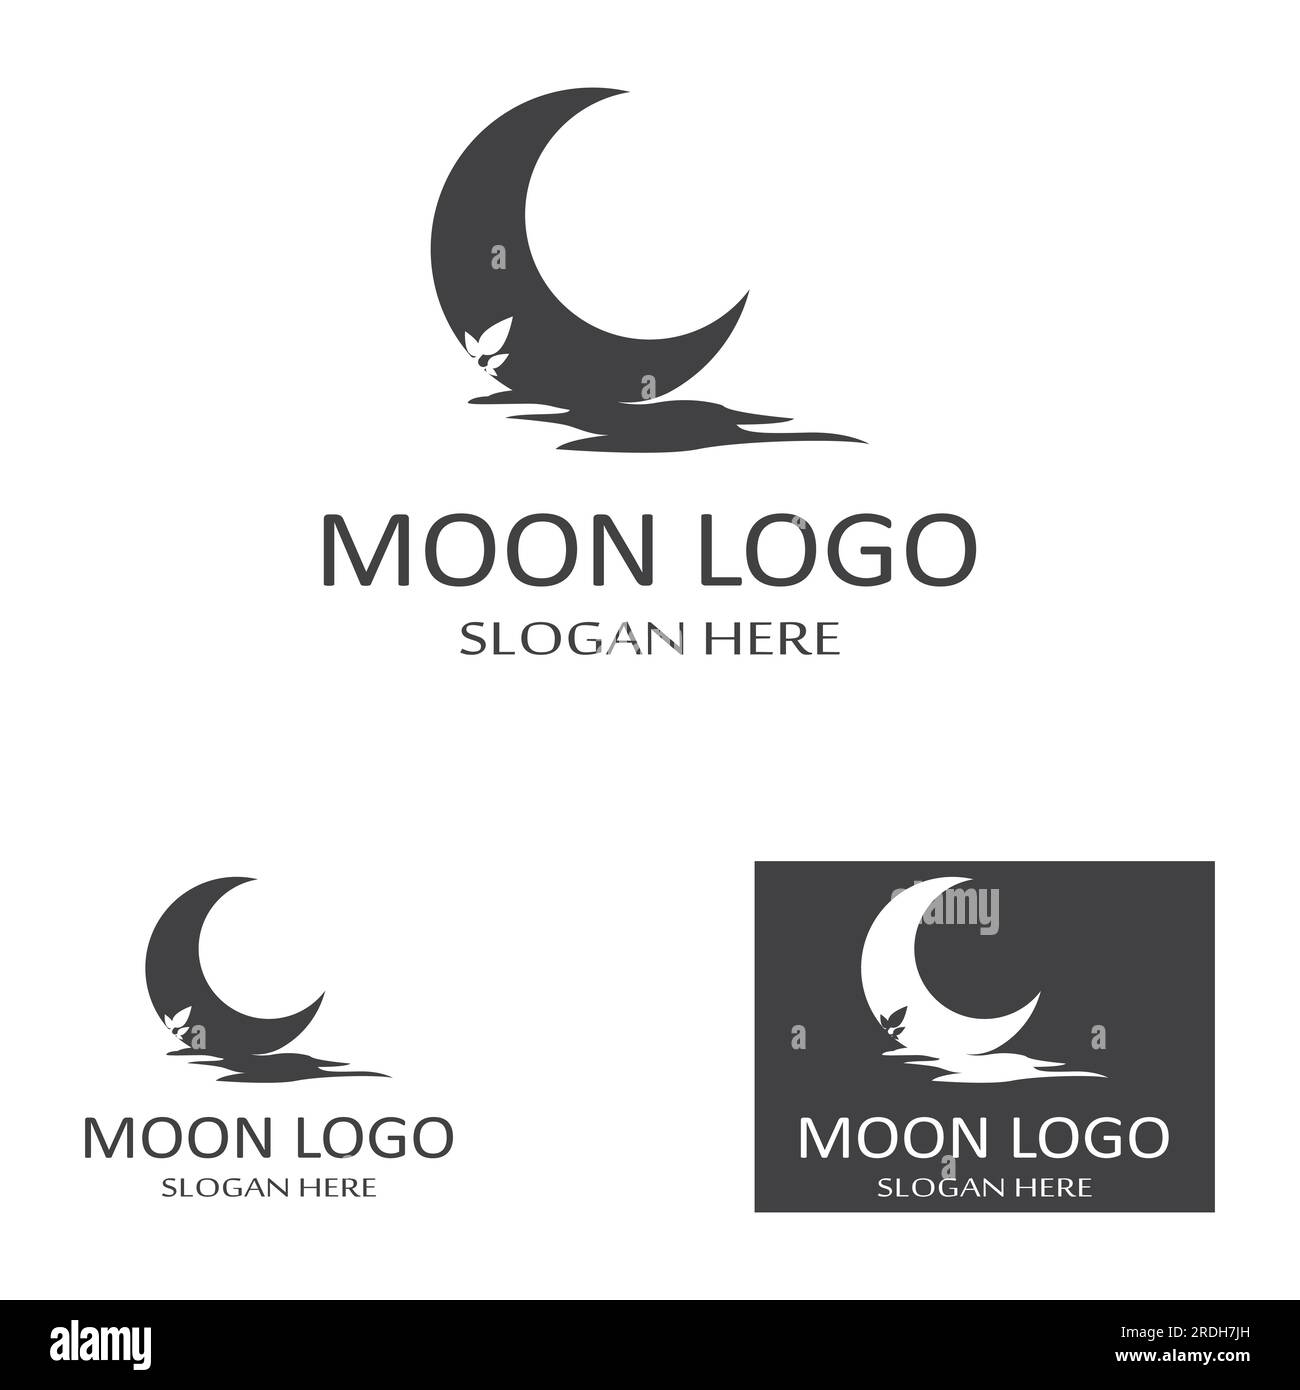 full moon and half moon logo, with logo vector icon concept design and ...